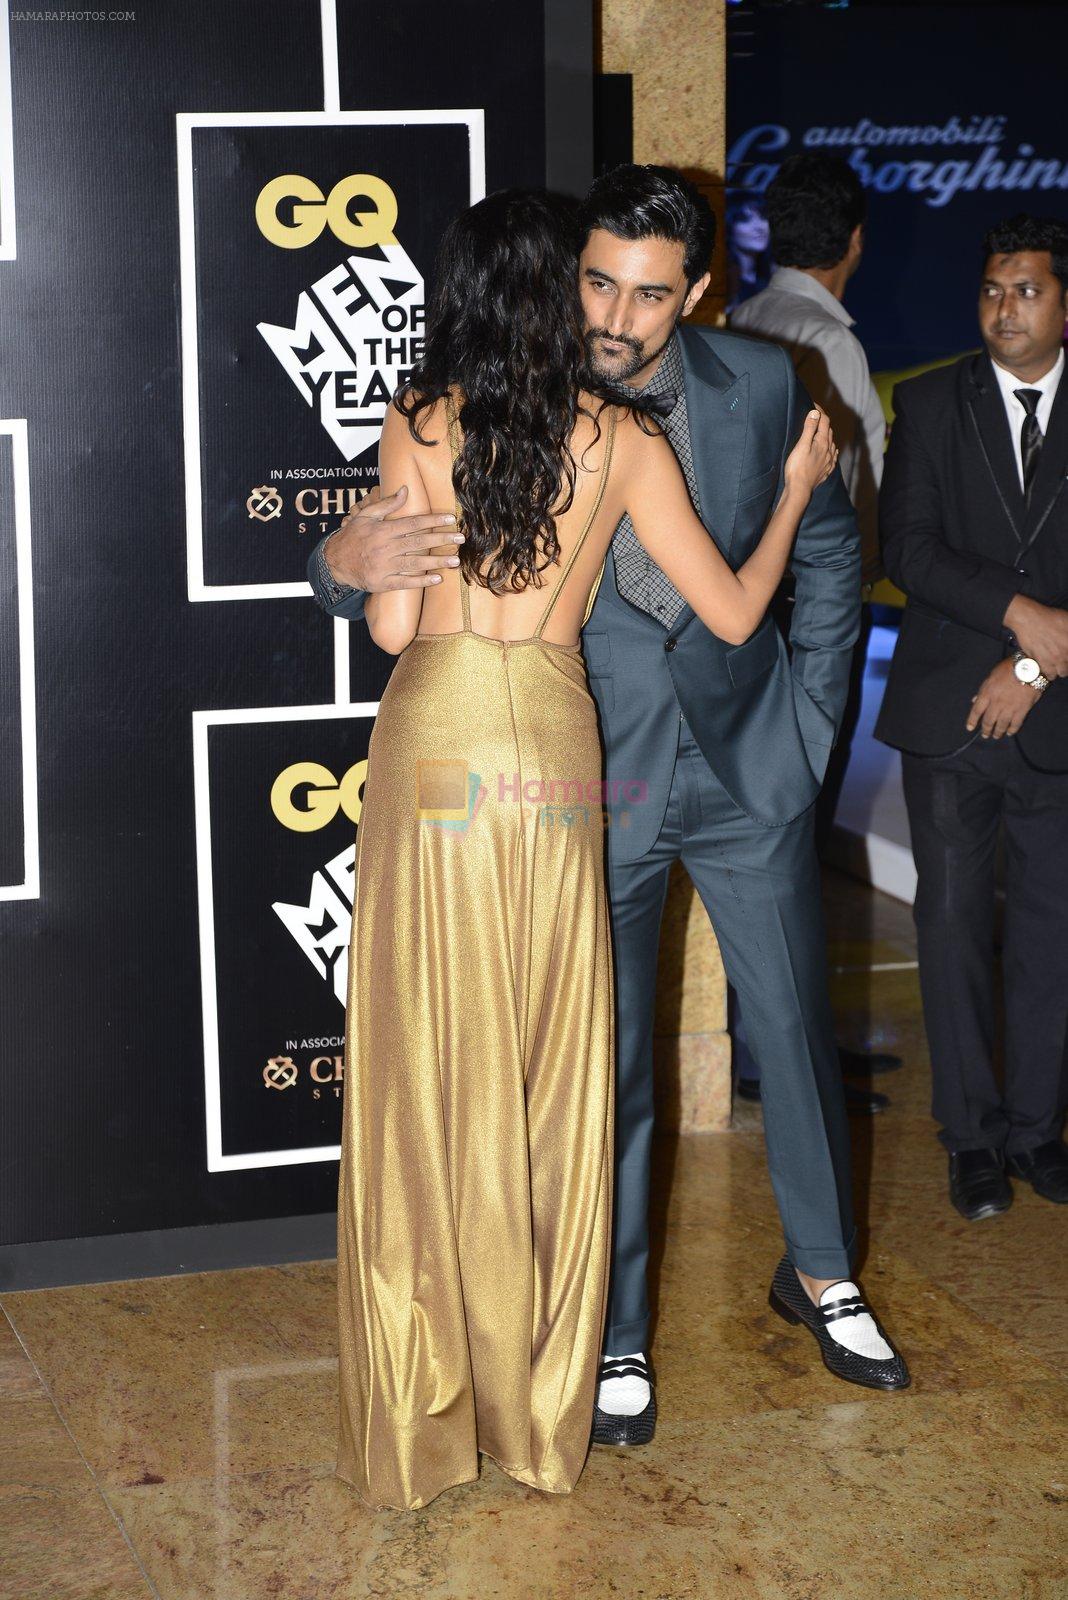 Sarah Jane Dias at GQ MEN OF THE YEAR on 27th Sept 2016